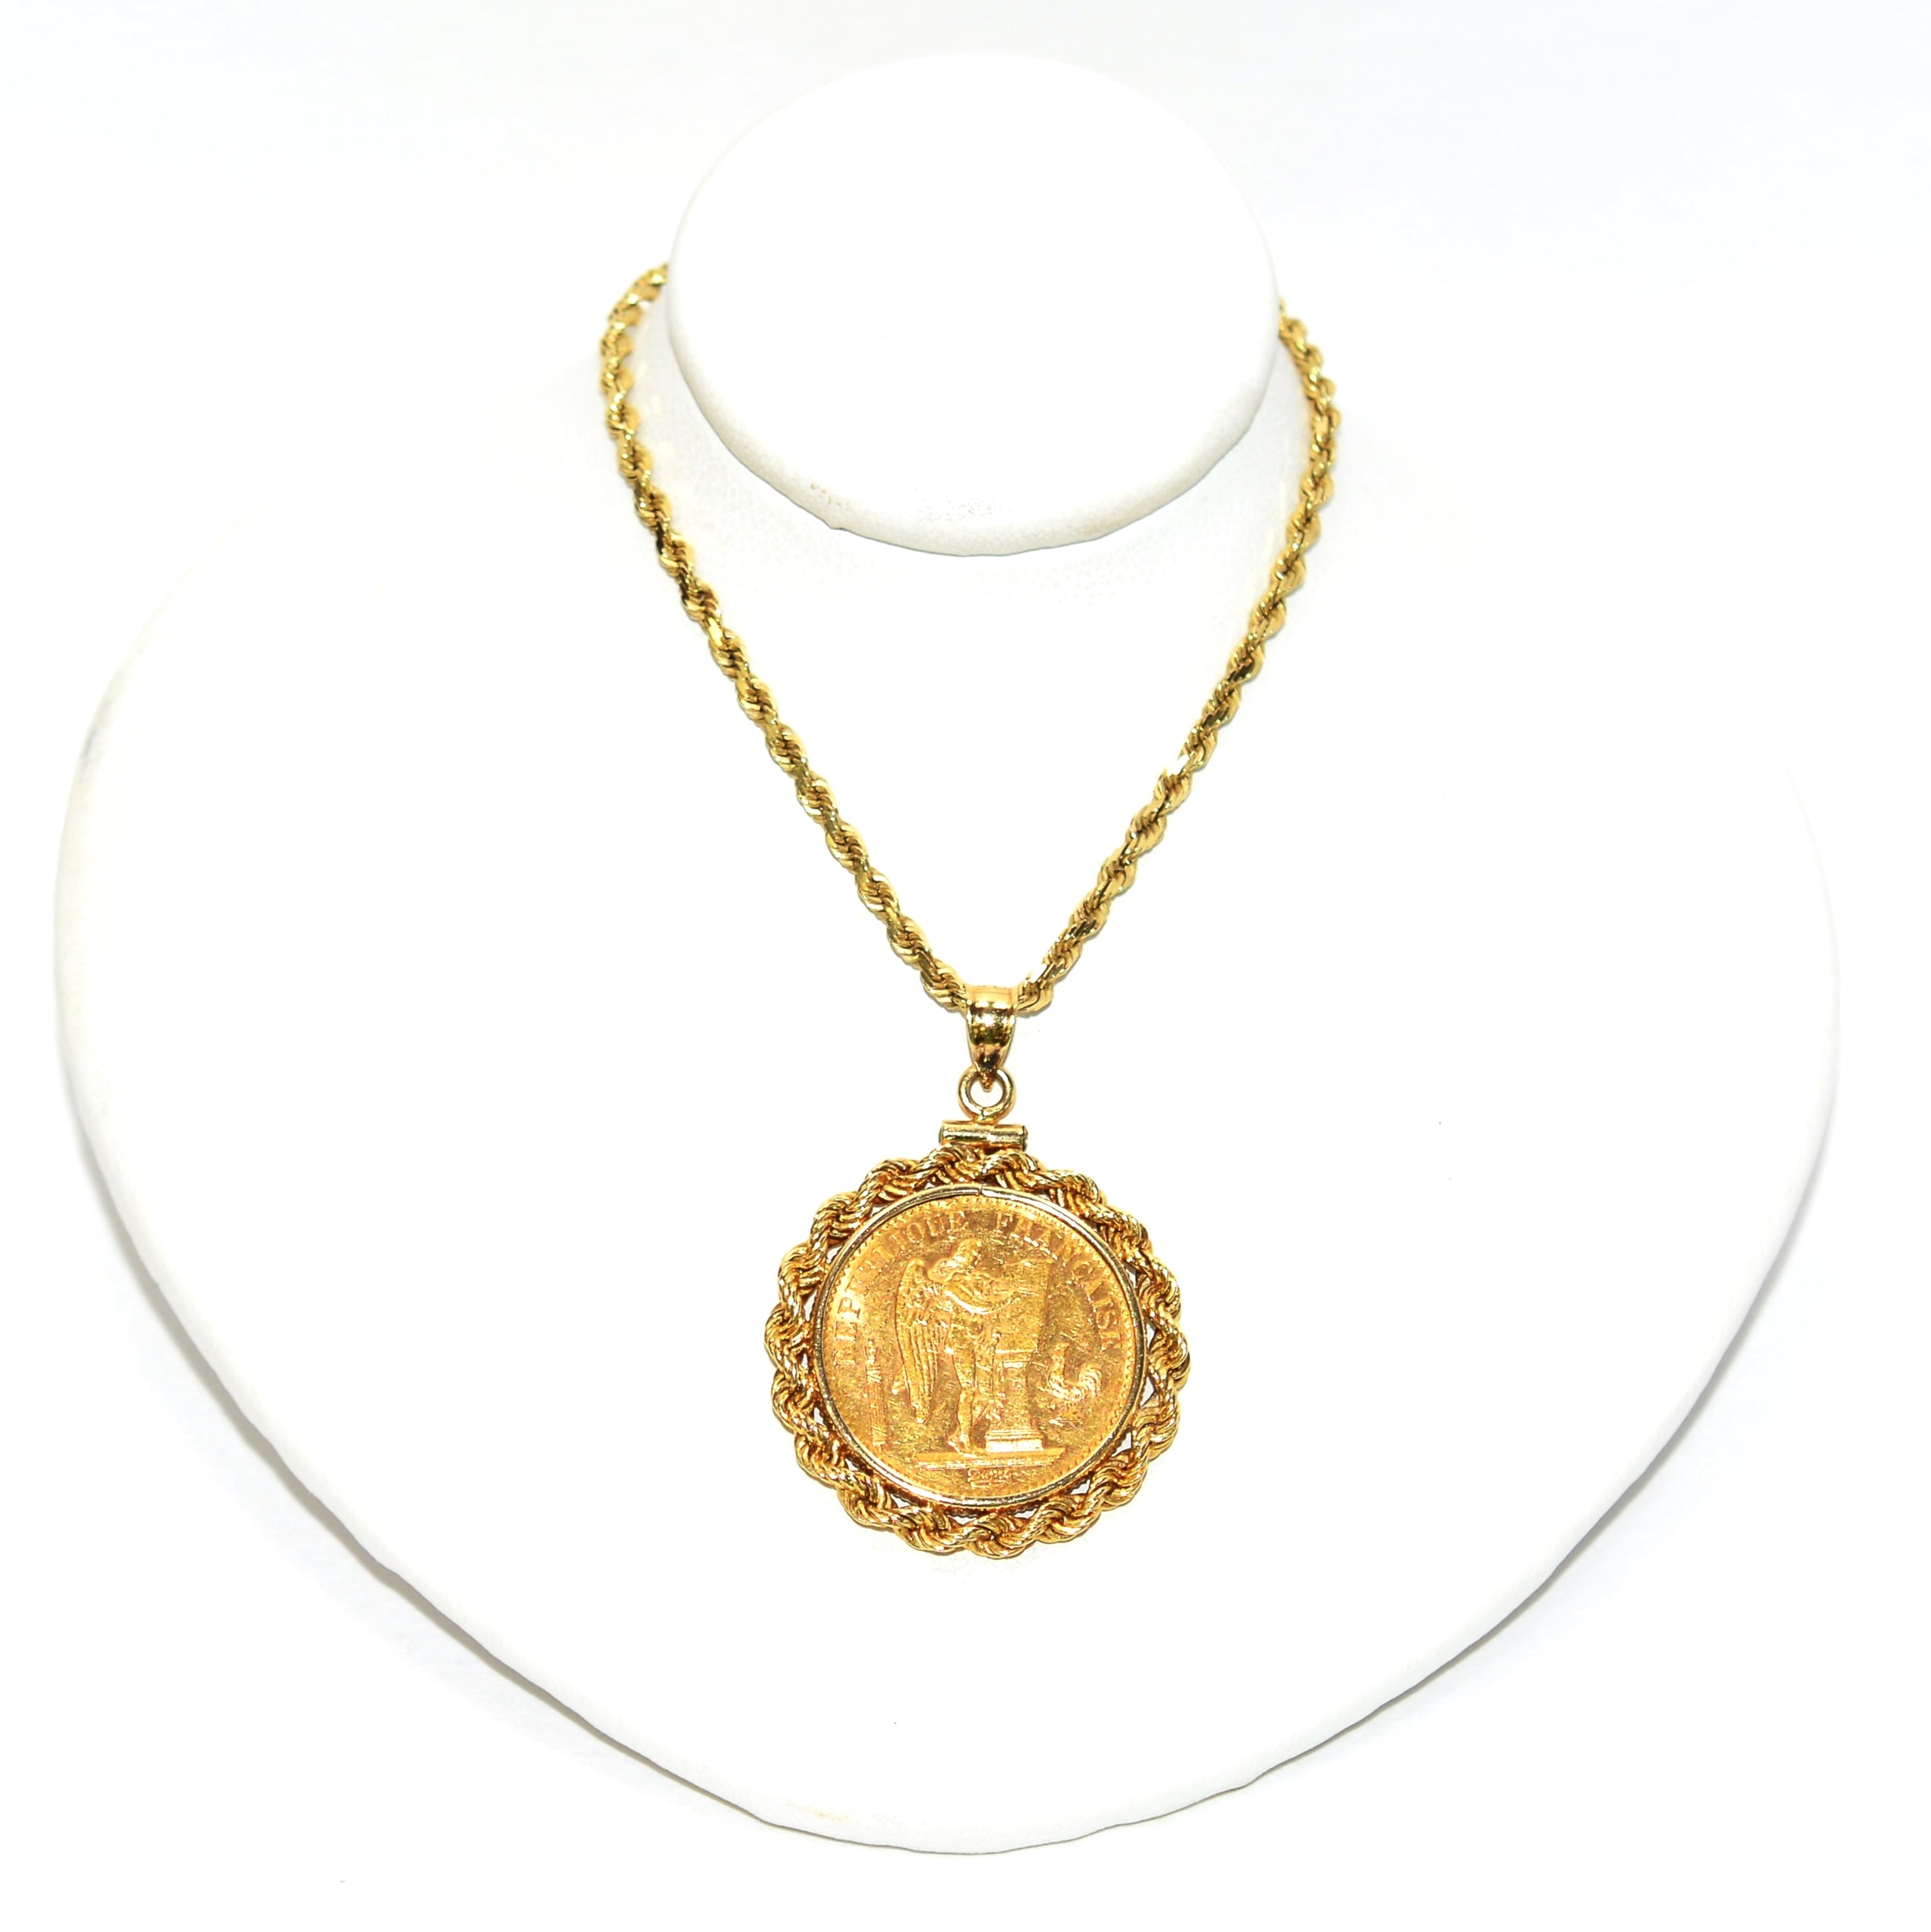 1897 20 Franc Coin Necklace 14K Solid Gold Lucky Angel Coin Necklace Coin Pendant Gold Coin Bullion Ingot Necklace Vintage Estate Jewellery